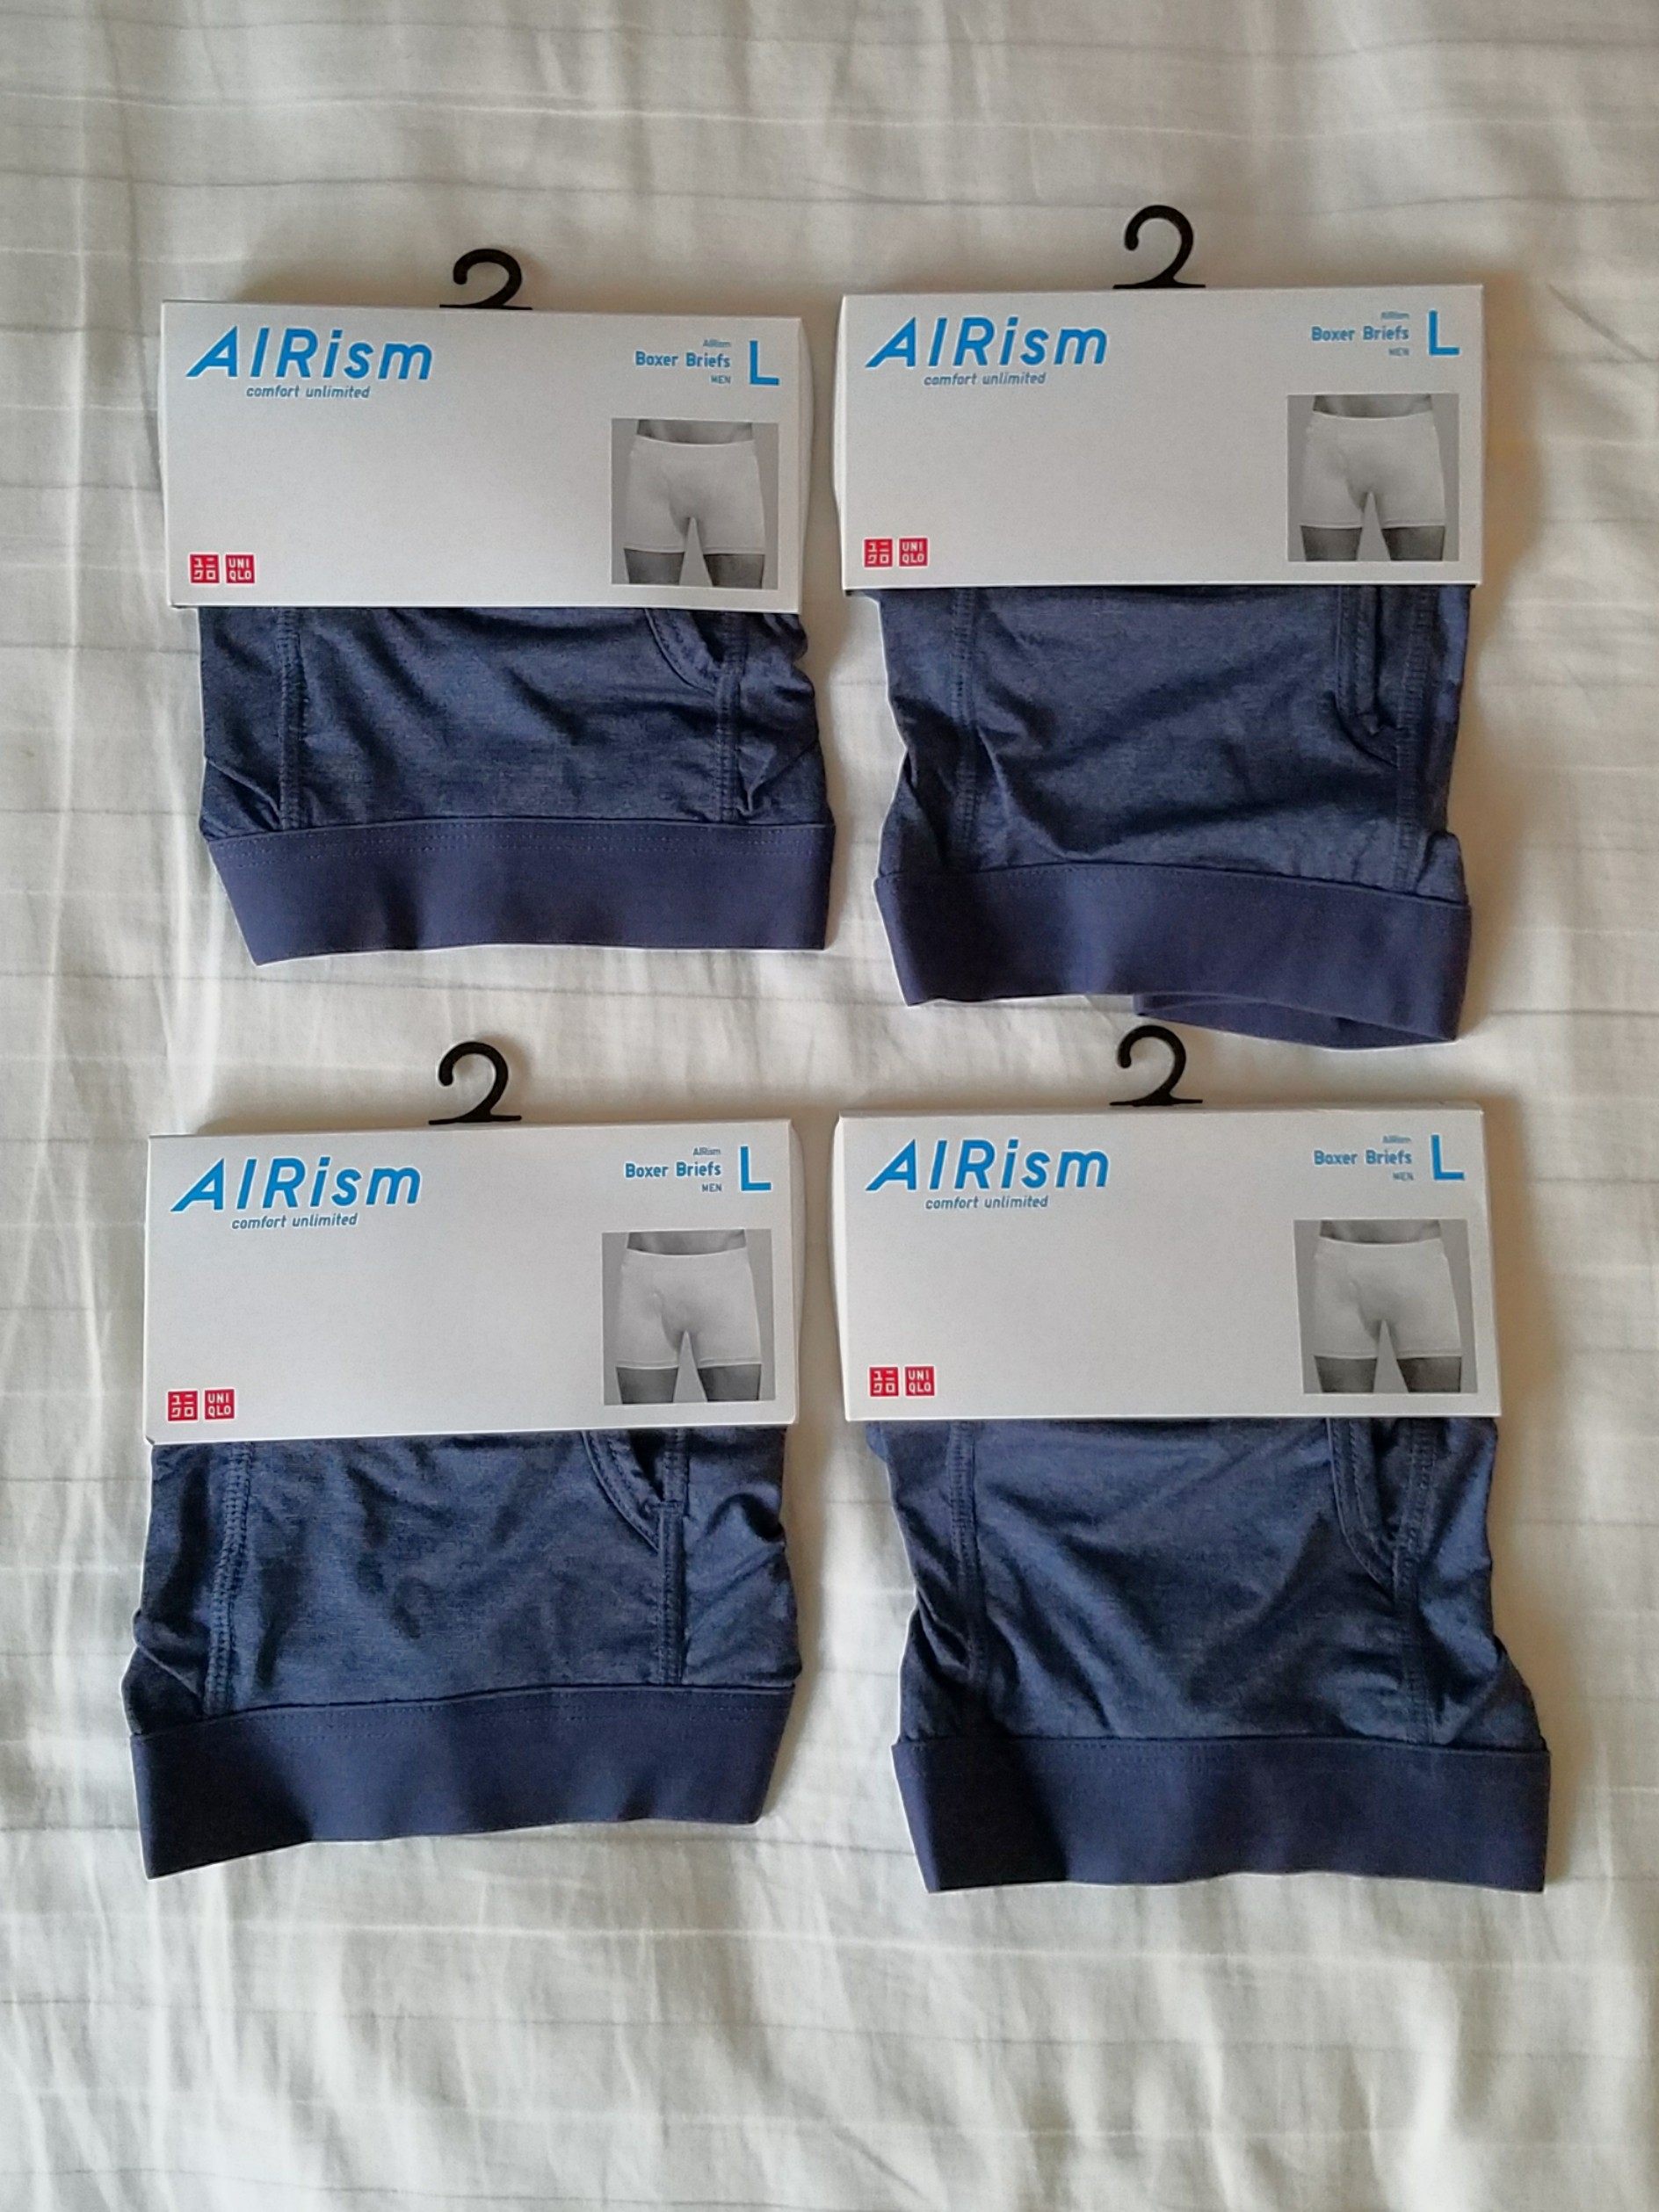 https://media.karousell.com/media/photos/products/2018/05/25/_uniqlo_airism___boxer_briefs_1527254190_c5659c58.jpg